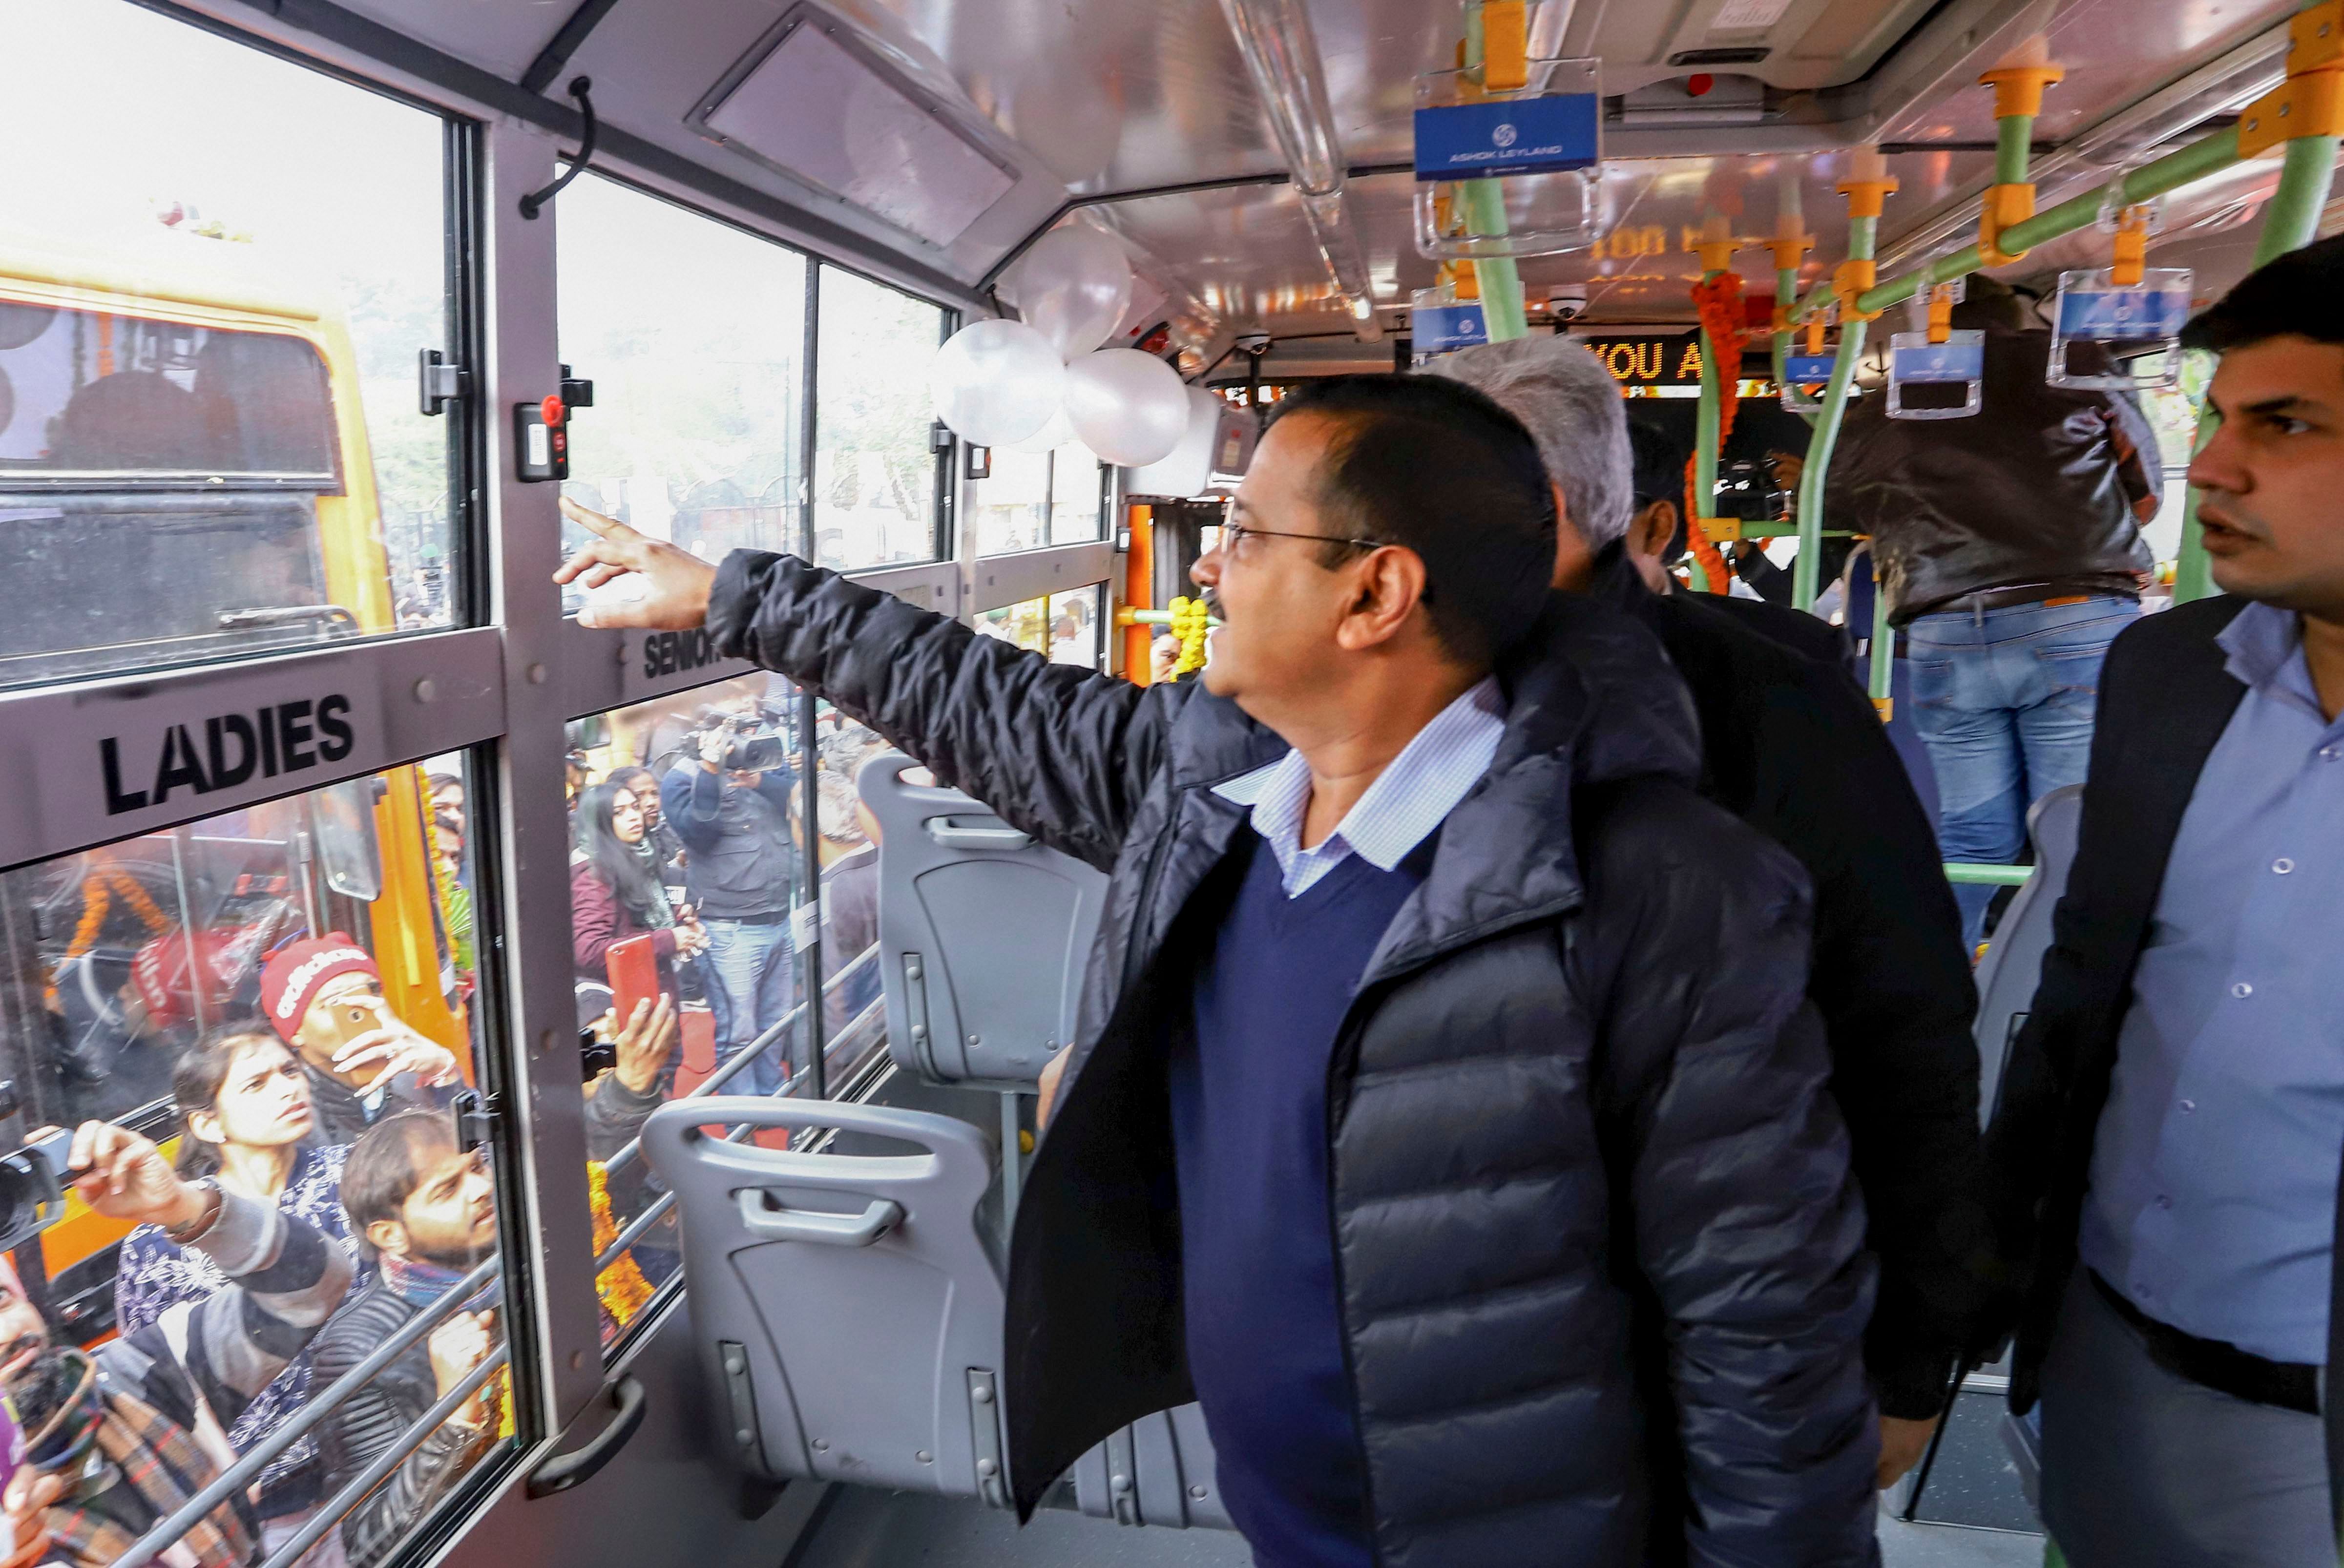 The buses are equipped with state-of-the-art features like hydraulic lifts for the differently-abled people, GPS trackers, panic buttons and CCTV cameras to ensure the safety of women. (PTI Photo)